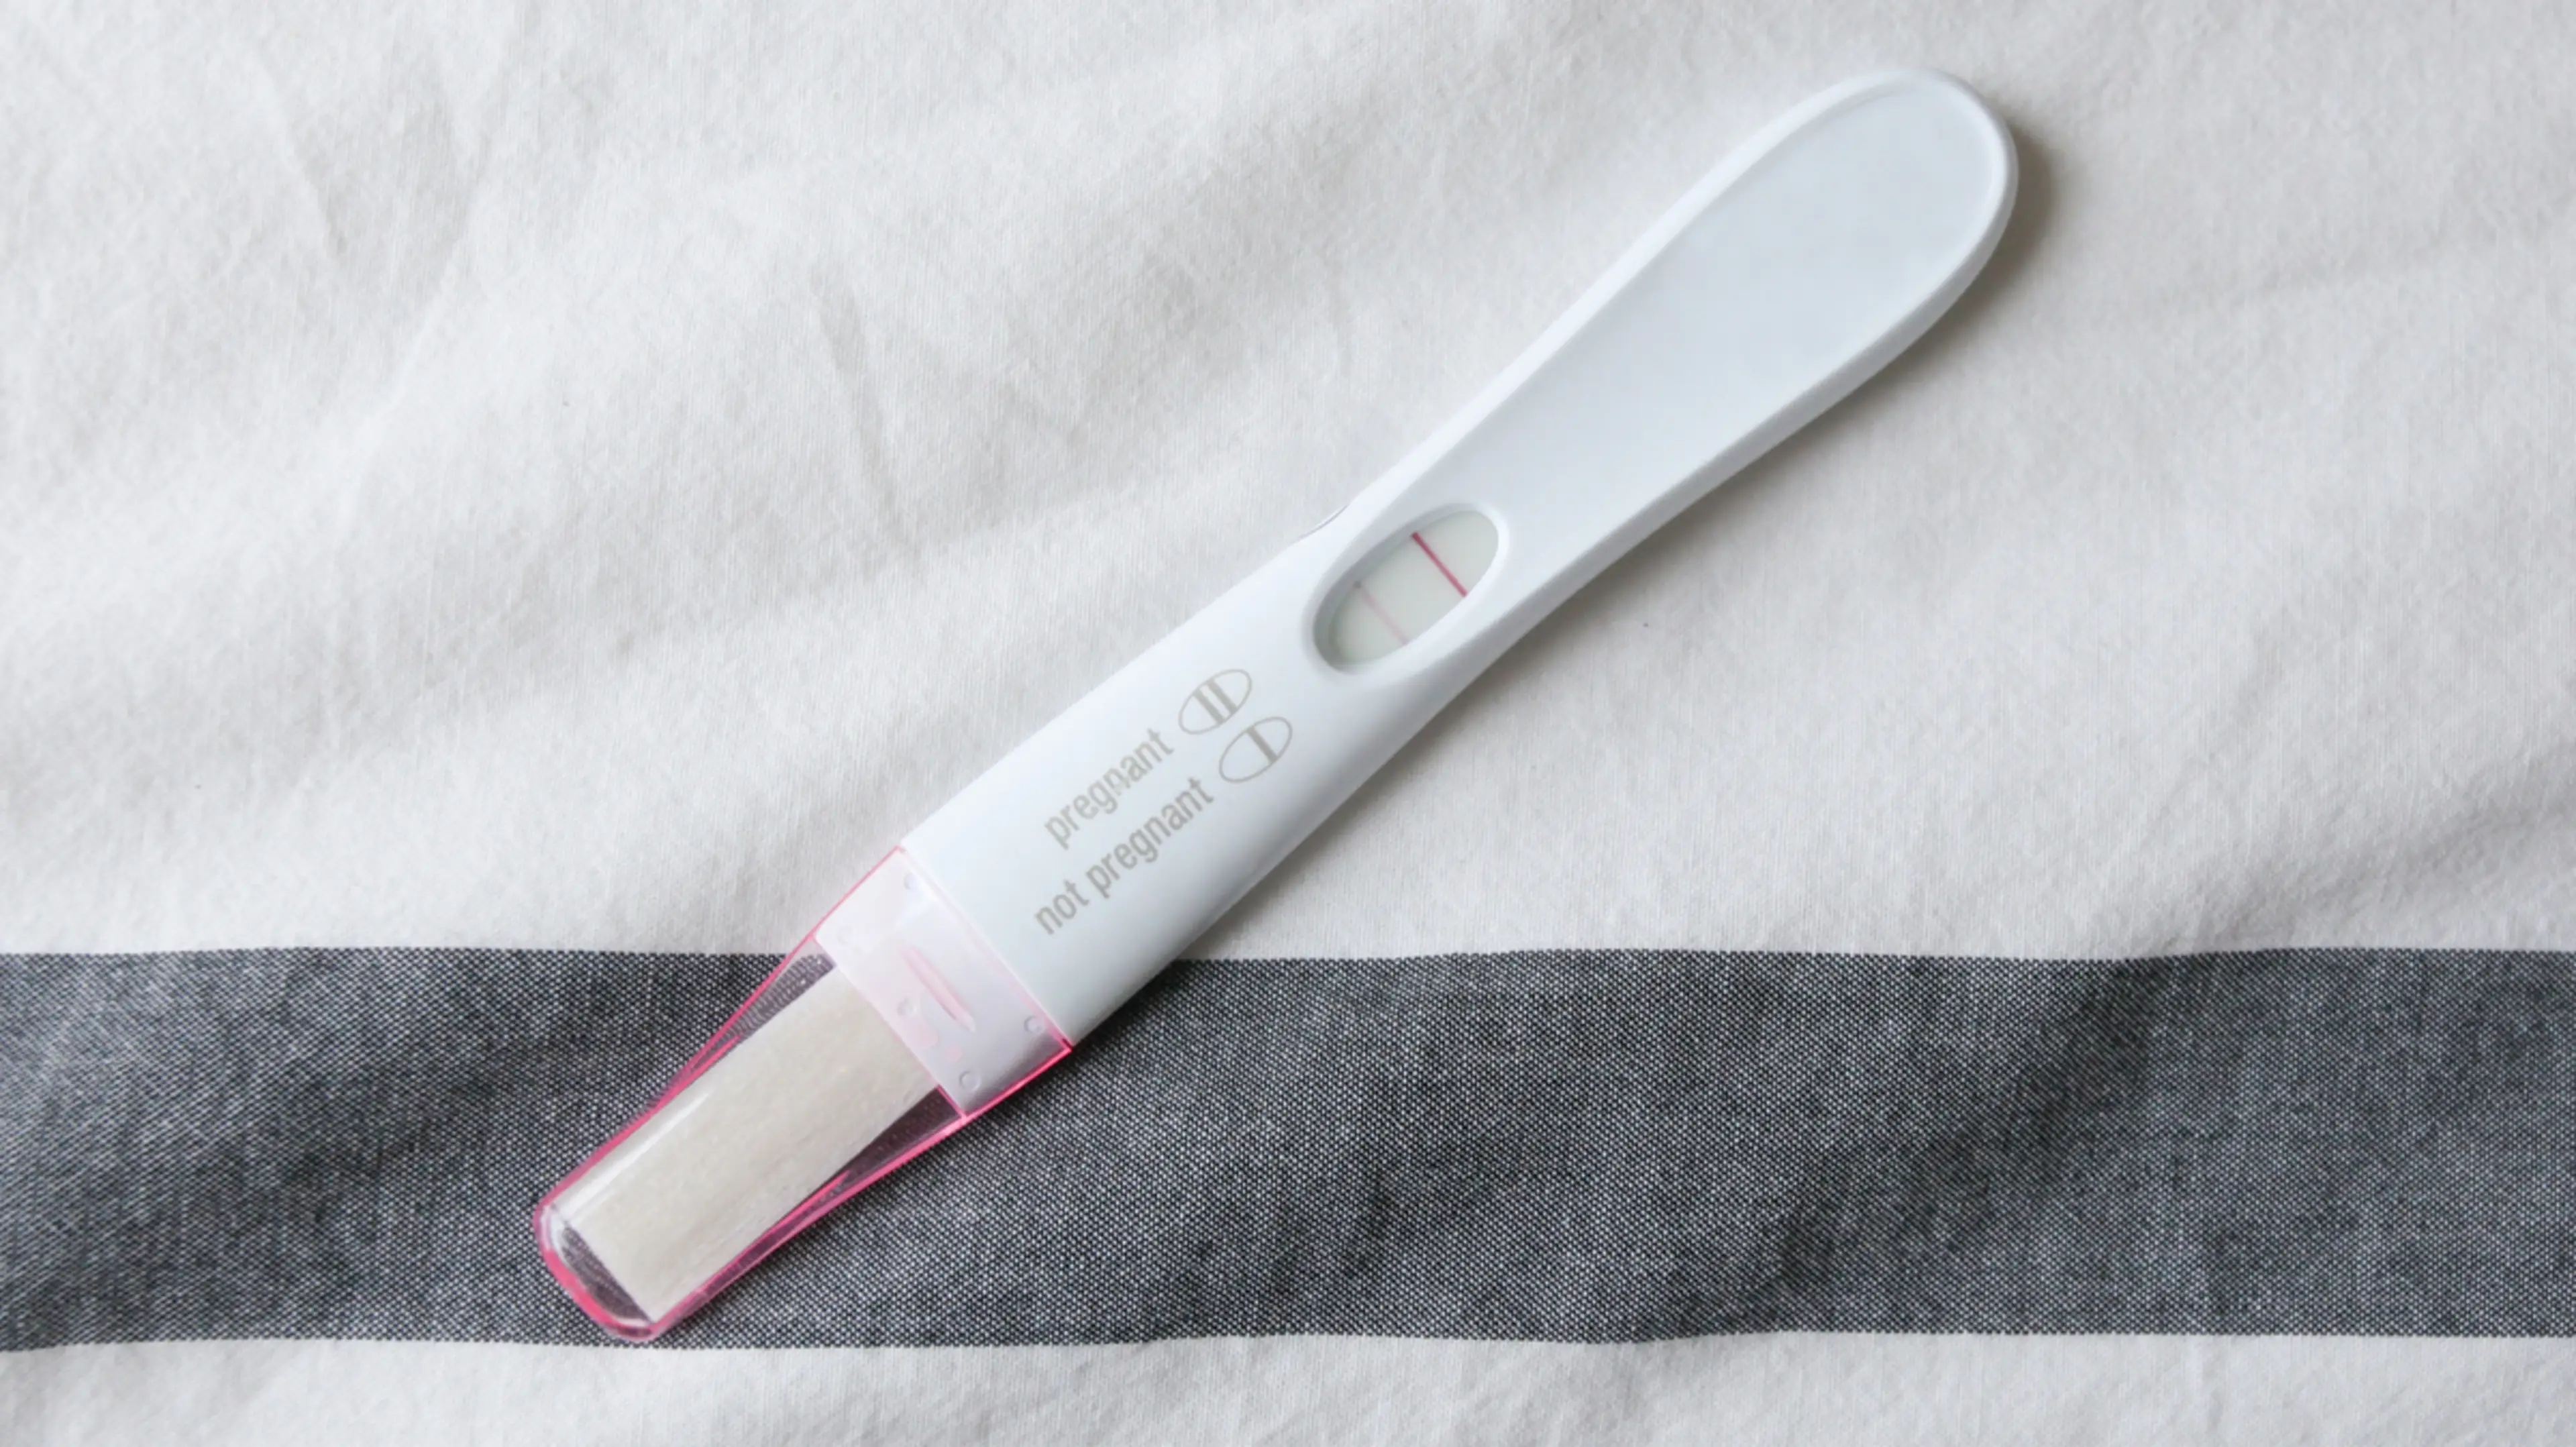  Positive Pregnancy Test? Take a Deep Breath and Read This